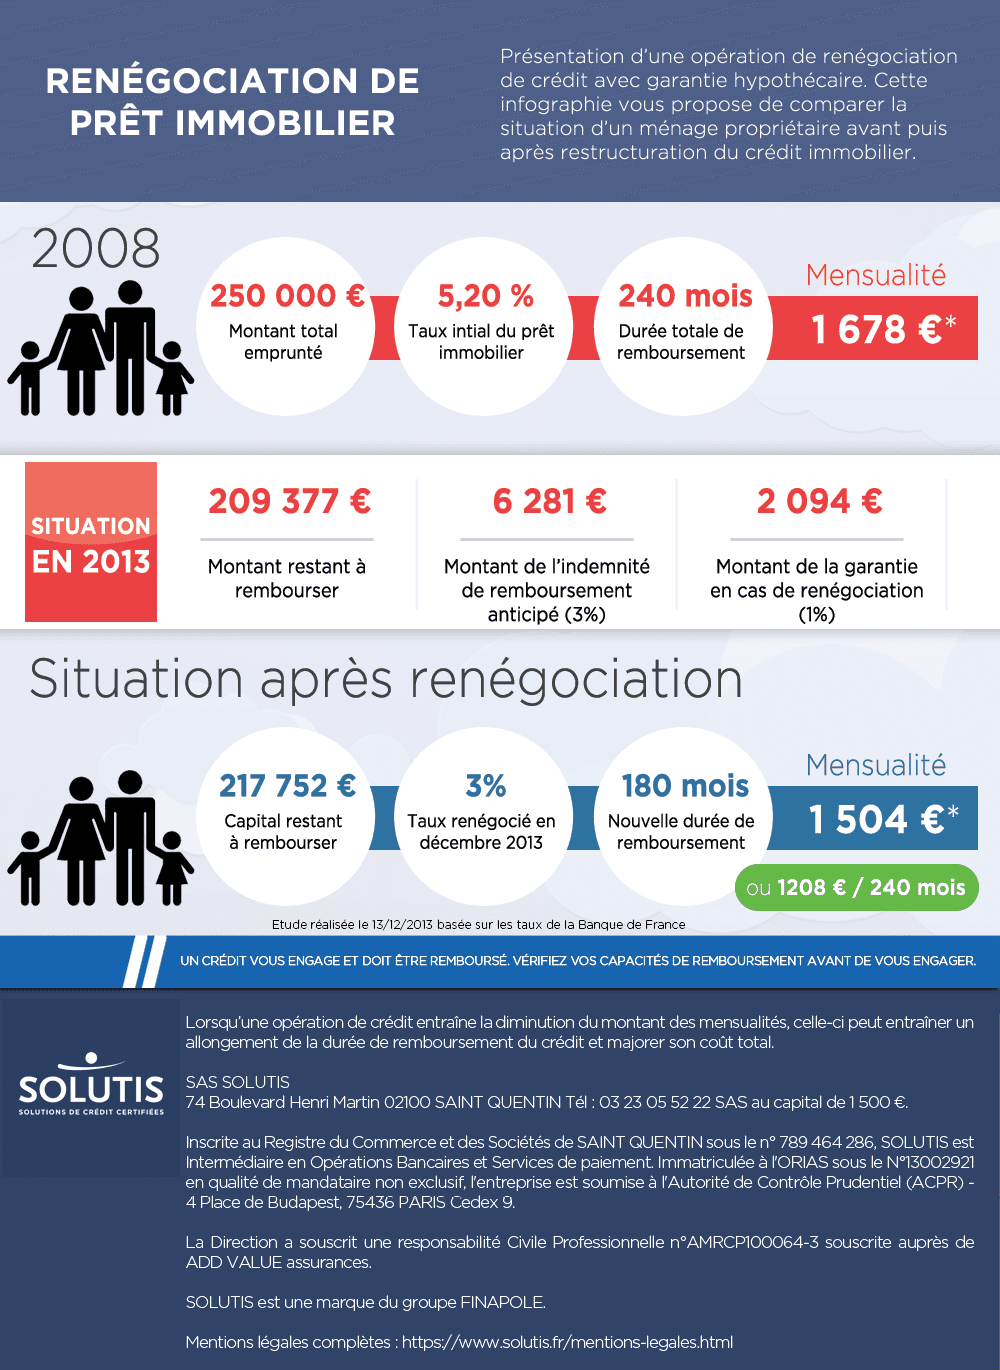 /images/actualites/infographie/infographie-renegociation-credit-immobilier-solutis-2014-01.png